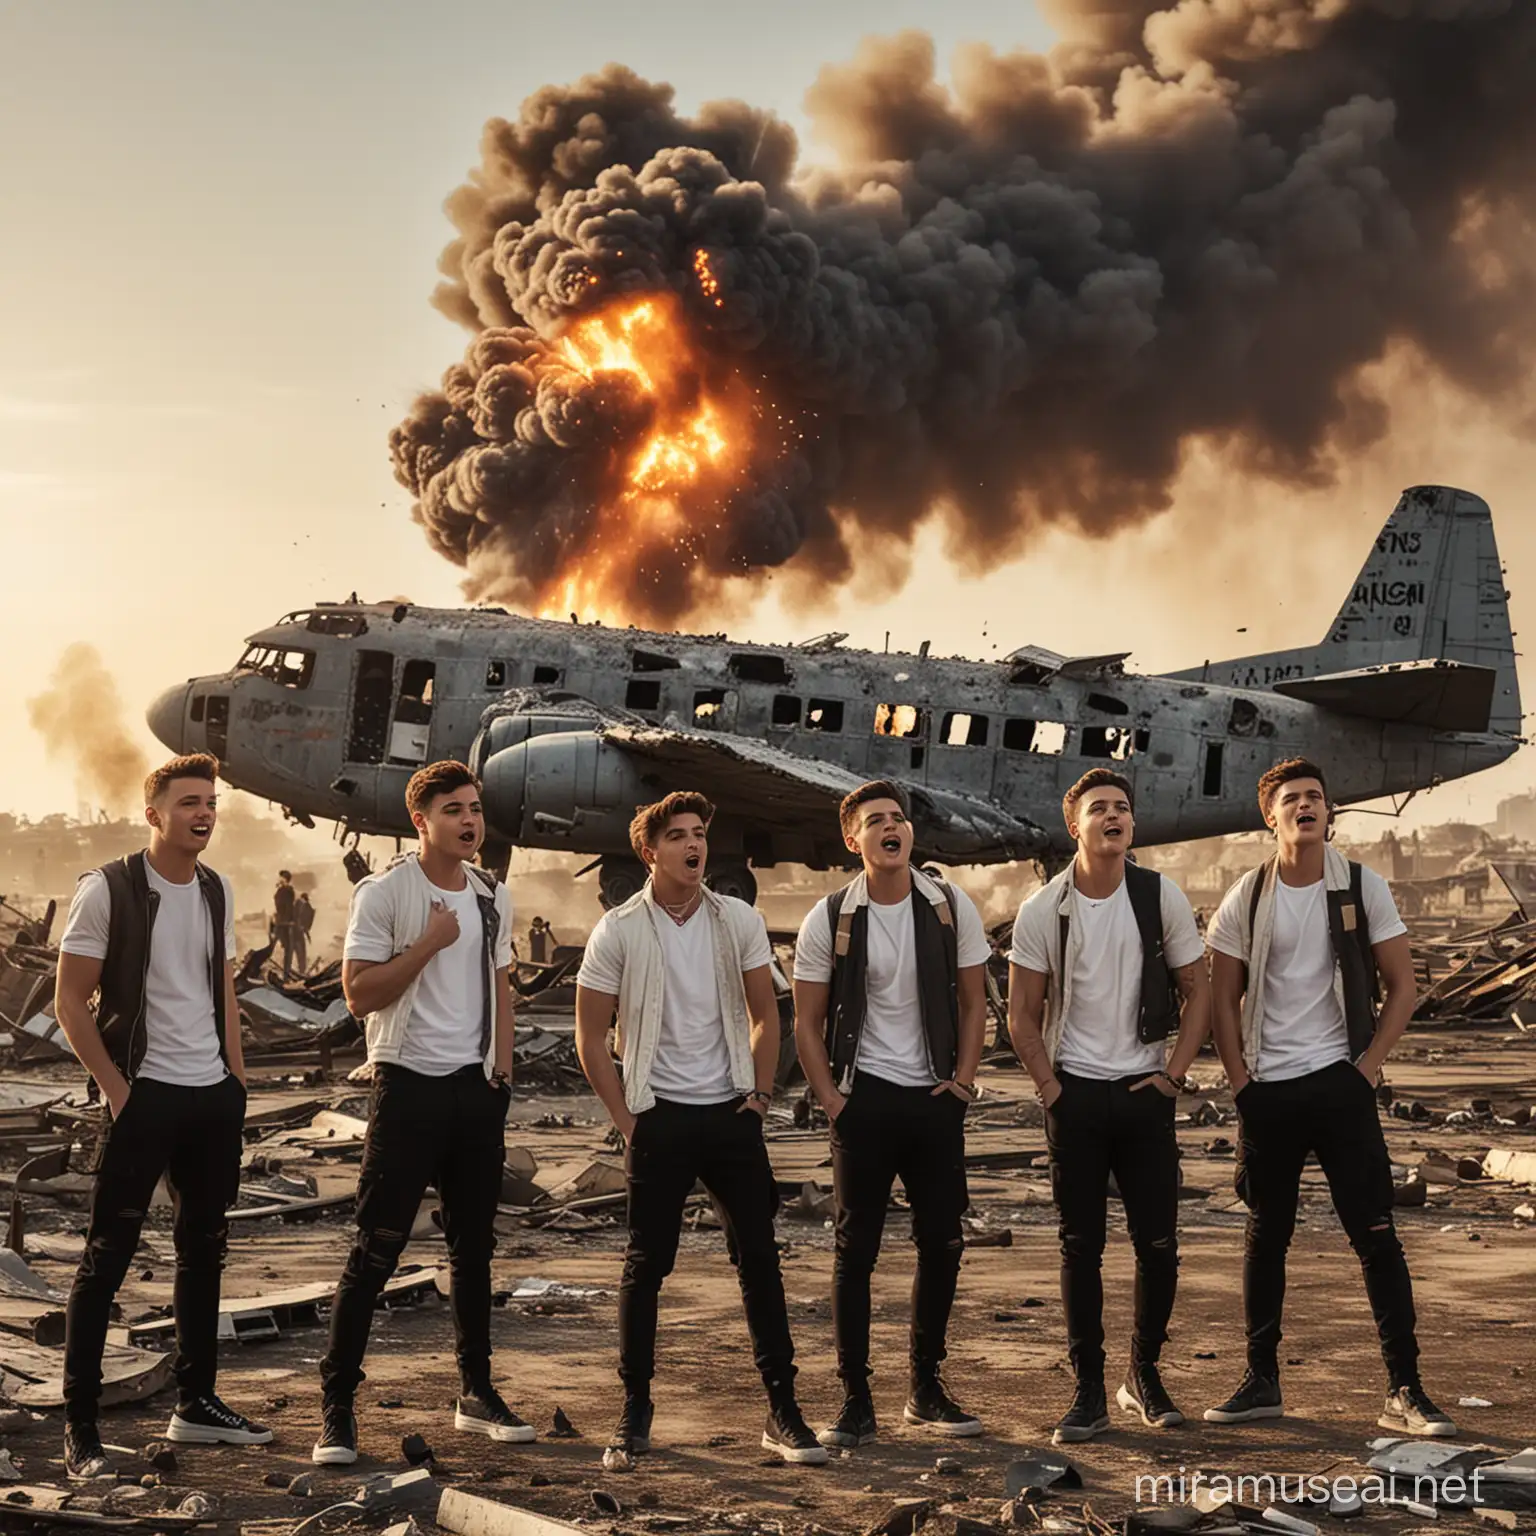 a boyband singing infront of a destroyed airplane with war and explosions in the background